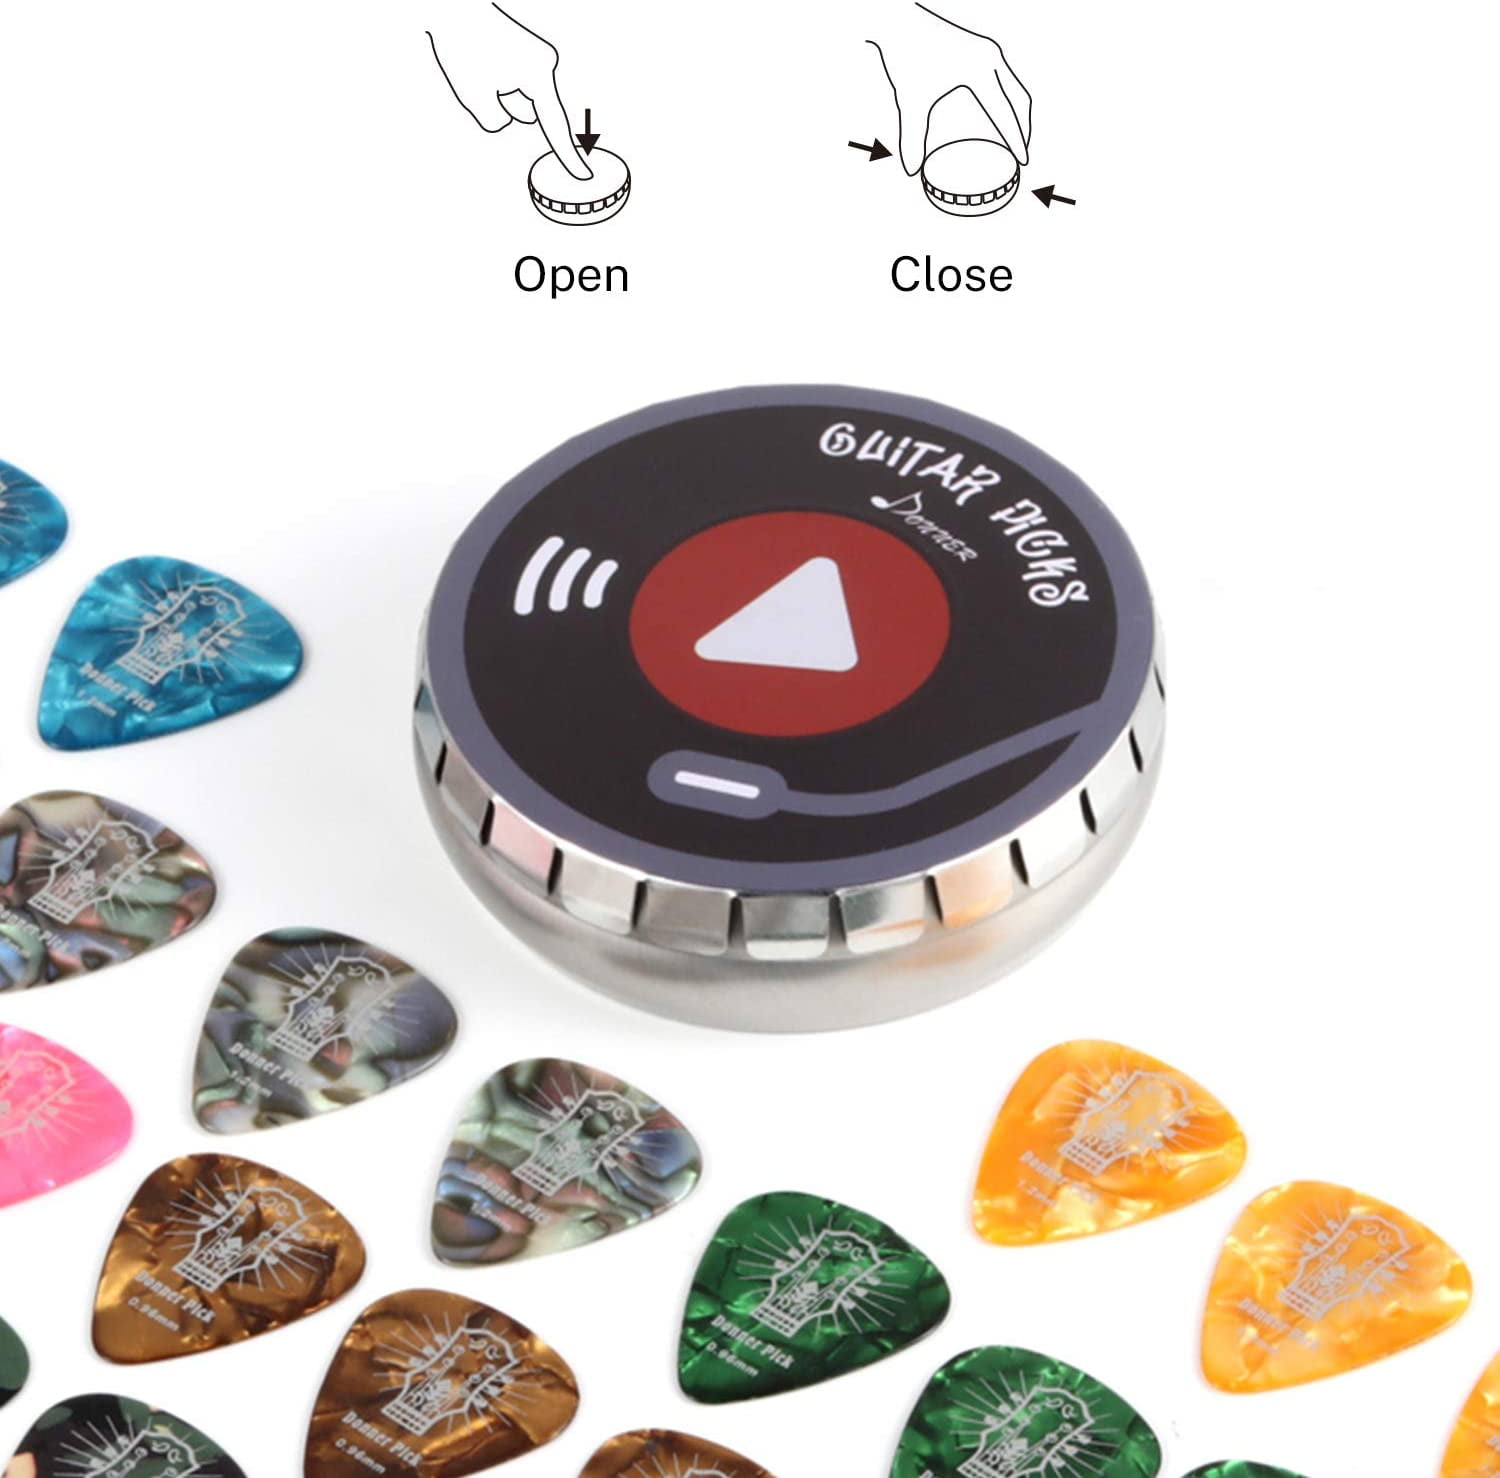 Donner Celluloid Guitar Picks 16 Pack with Tin Box includes Thin, Medium,  Heavy & Extra Heavy Picks, for Acoustic Guitar Electric Guitar Uku